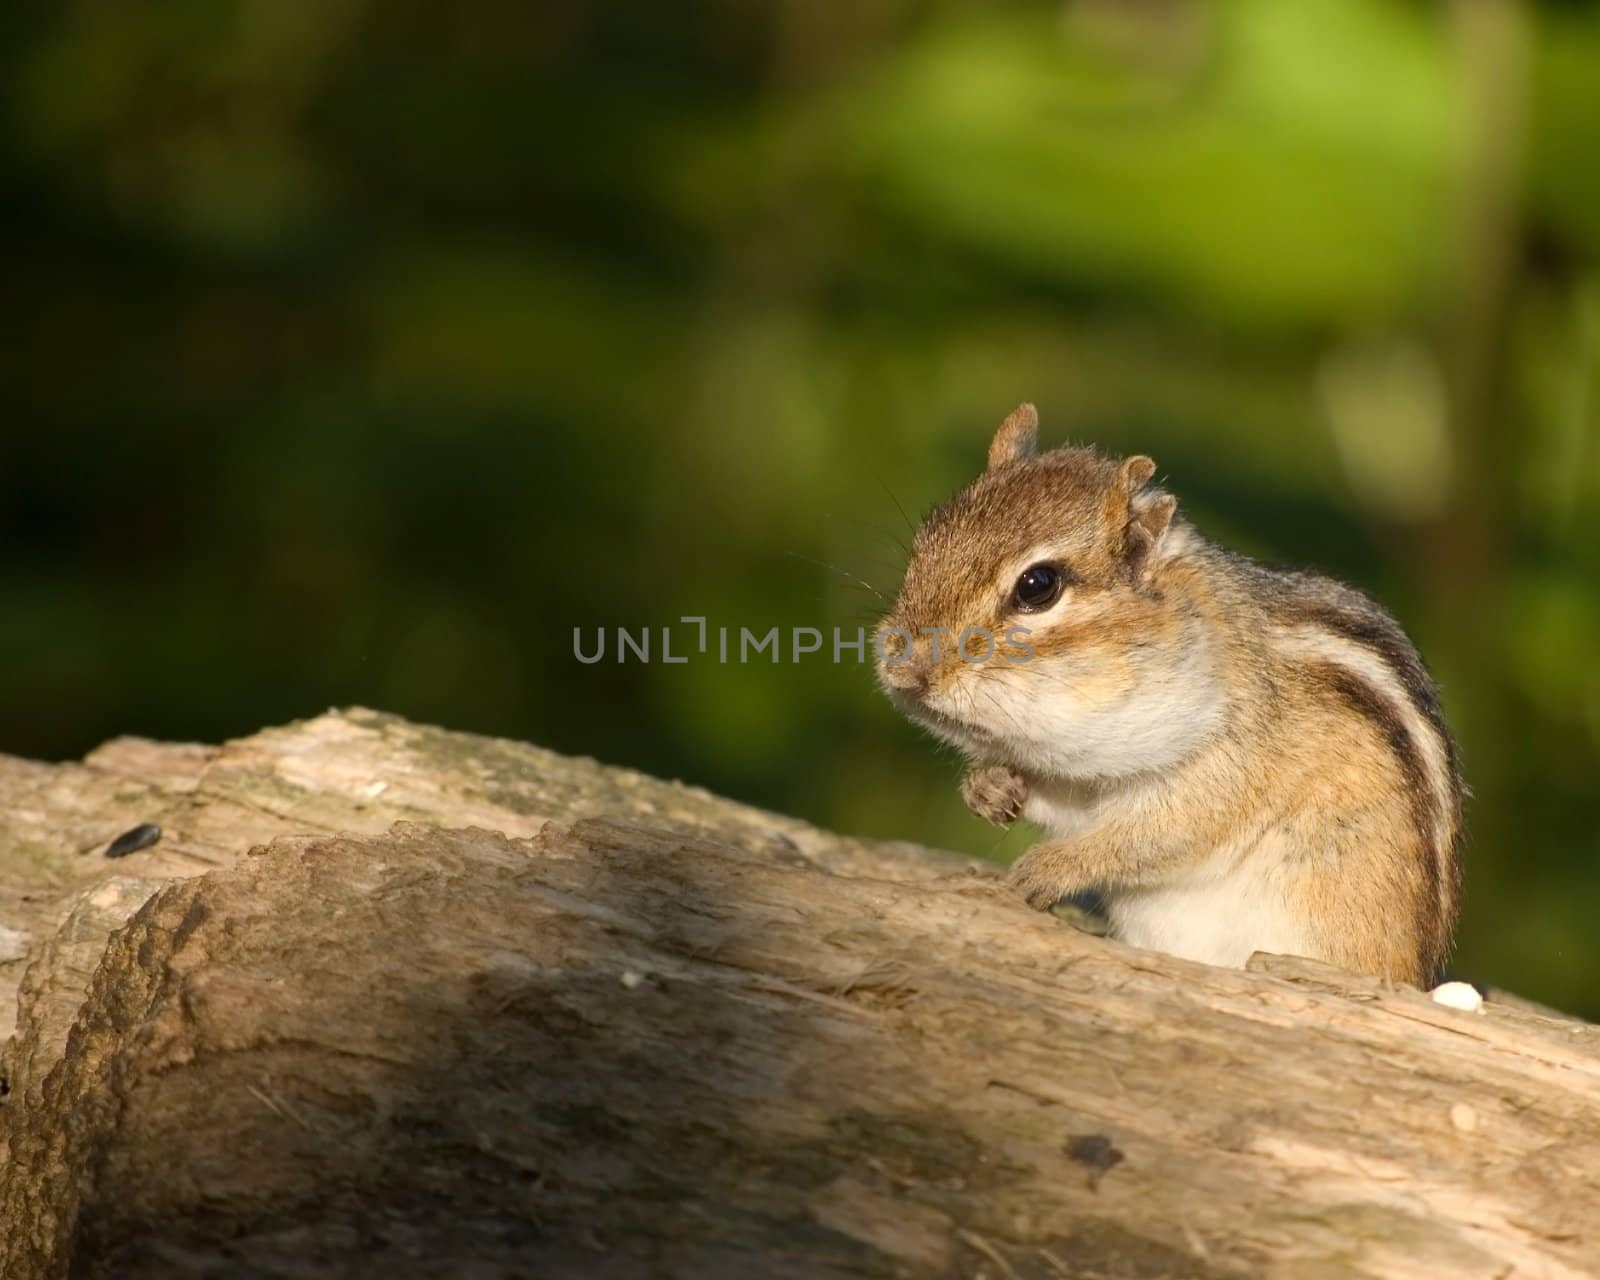 A chipmunk perched on a log with food stuffing his cheeks.